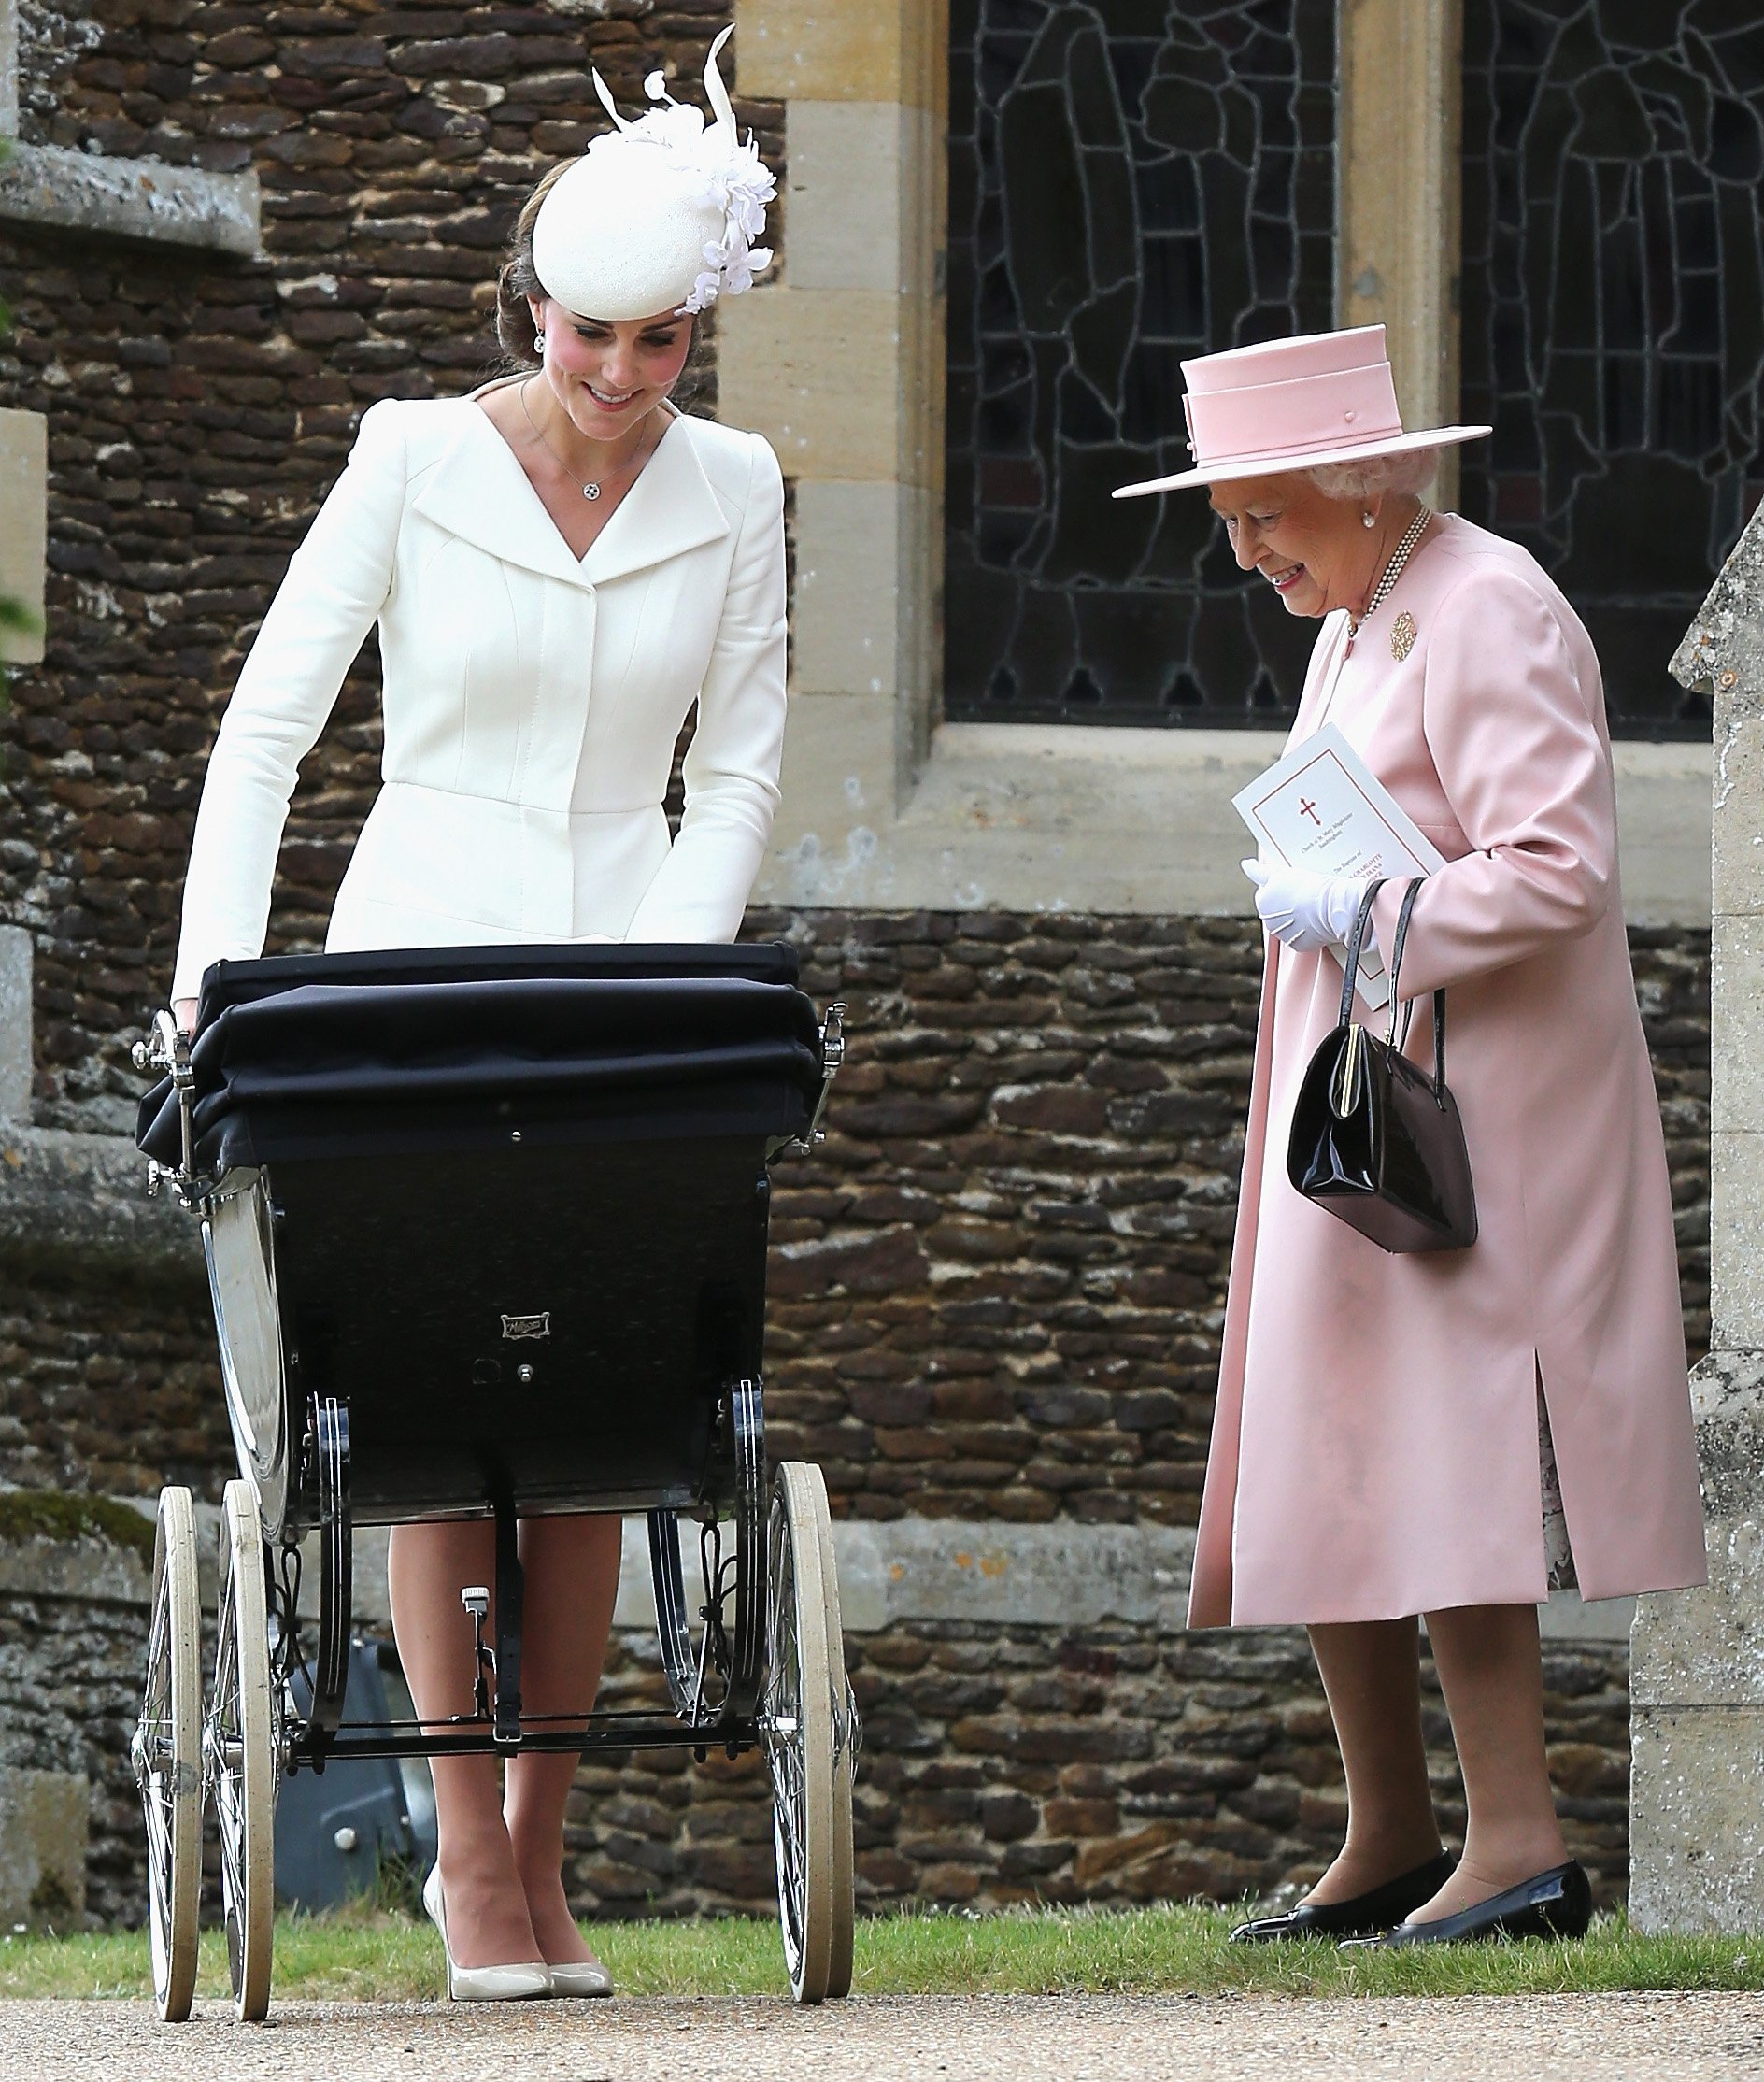 Kate Middleton photographed pushing her daughter Princess Charlotte in her pram as Queen Elizabeth II looks on as they leave the Church of St Mary Magdalene on the Sandringham Estate for the Christening of Princess Charlotte on July 5, 2015 in King's Lynn, England | Source: Getty Images